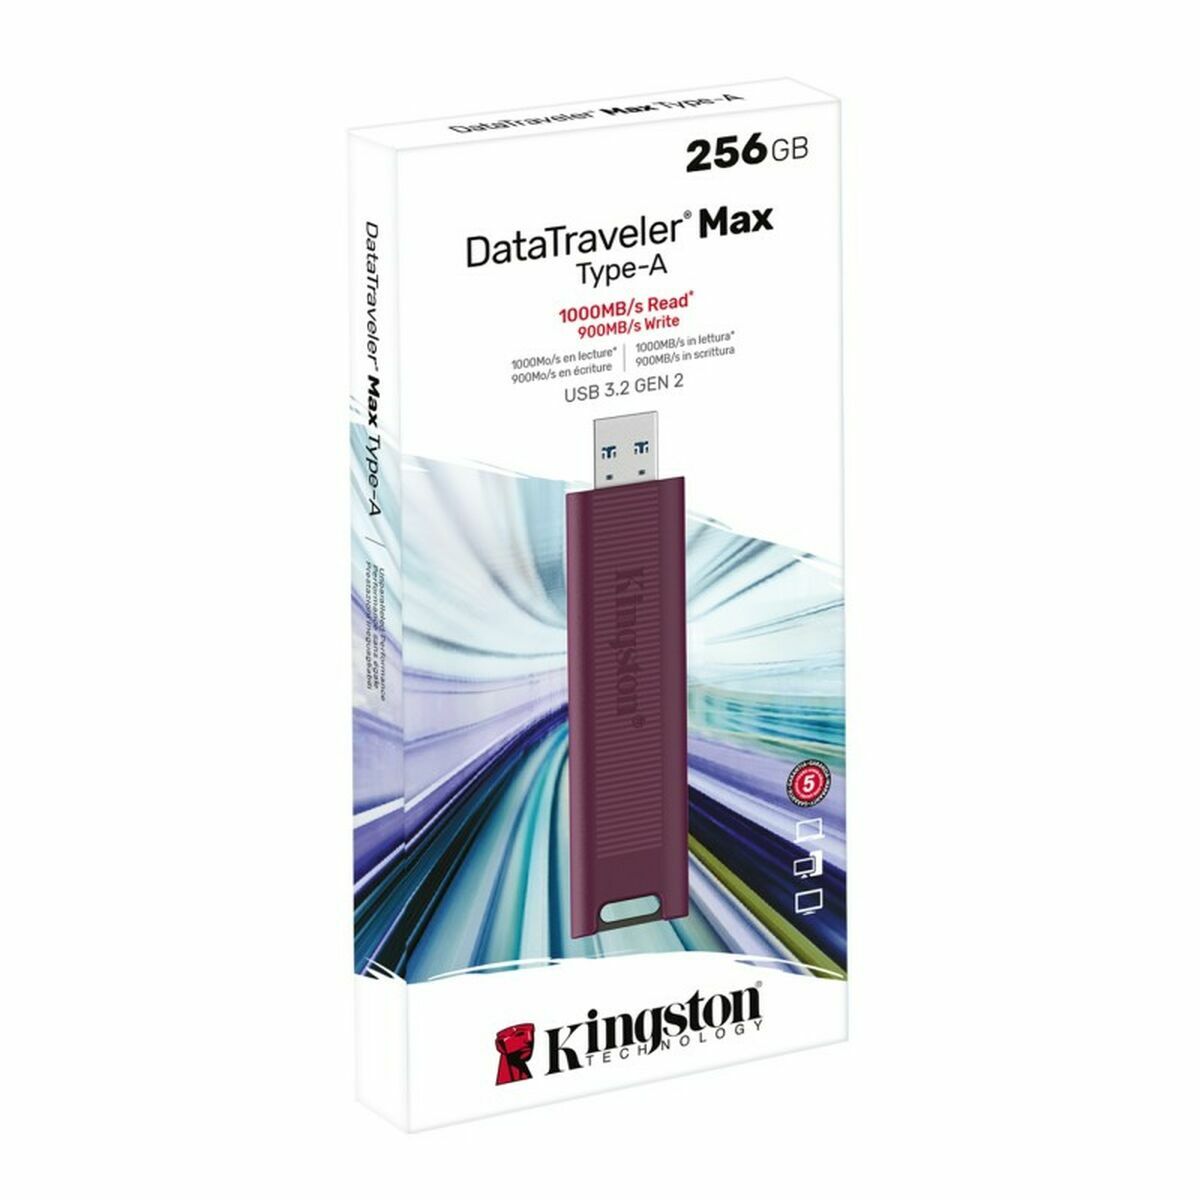 USB stick   Kingston Max         Red 256 GB, Kingston, Computing, Data storage, usb-stick-kingston-max-red-256-gb, Brand_Kingston, category-reference-2609, category-reference-2803, category-reference-2817, category-reference-t-19685, category-reference-t-19909, category-reference-t-21355, category-reference-t-25636, computers / components, Condition_NEW, Price_50 - 100, Teleworking, RiotNook